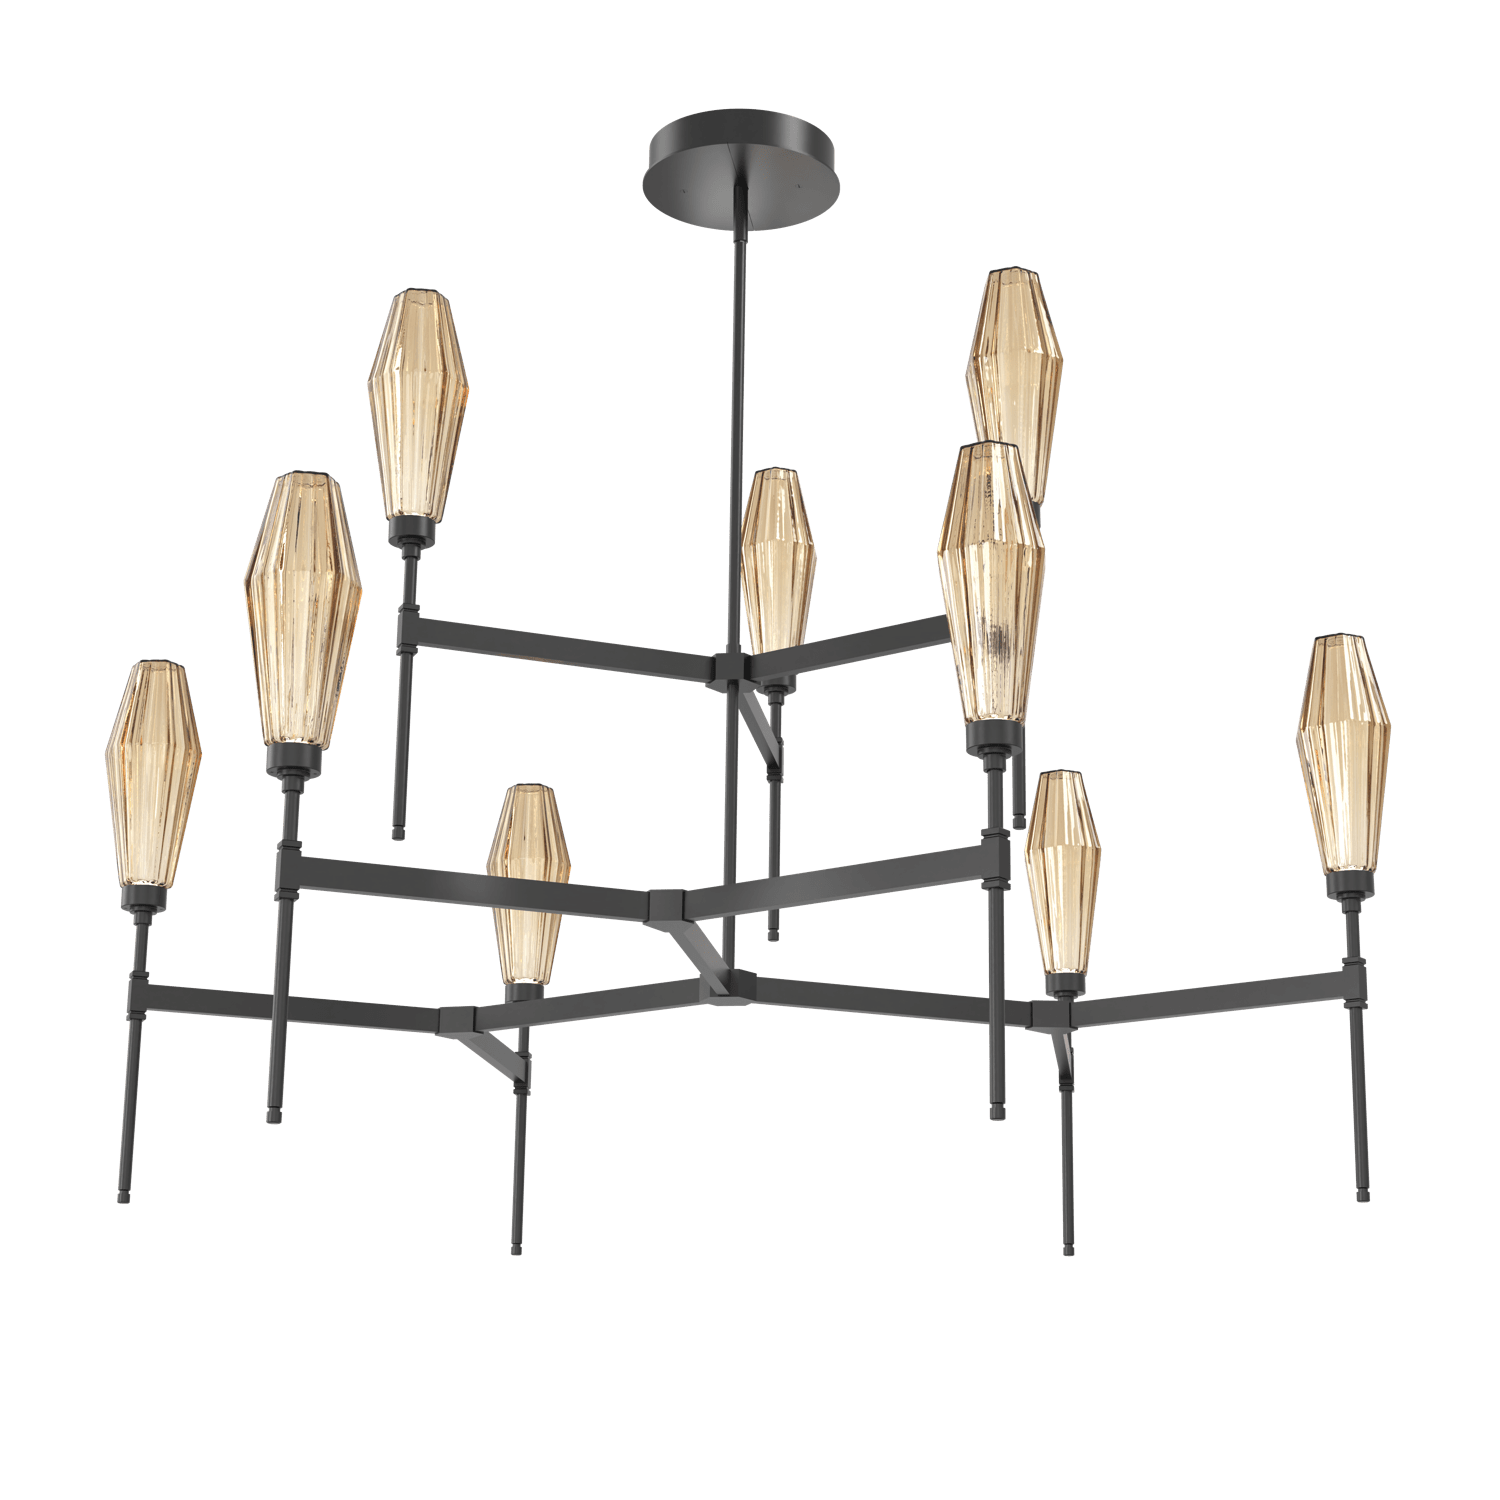 CHB0049-54-MB-RB-Hammerton-Studio-Aalto-54-inch-round-two-tier-belvedere-chandelier-with-matte-black-finish-and-optic-ribbed-bronze-glass-shades-and-LED-lamping